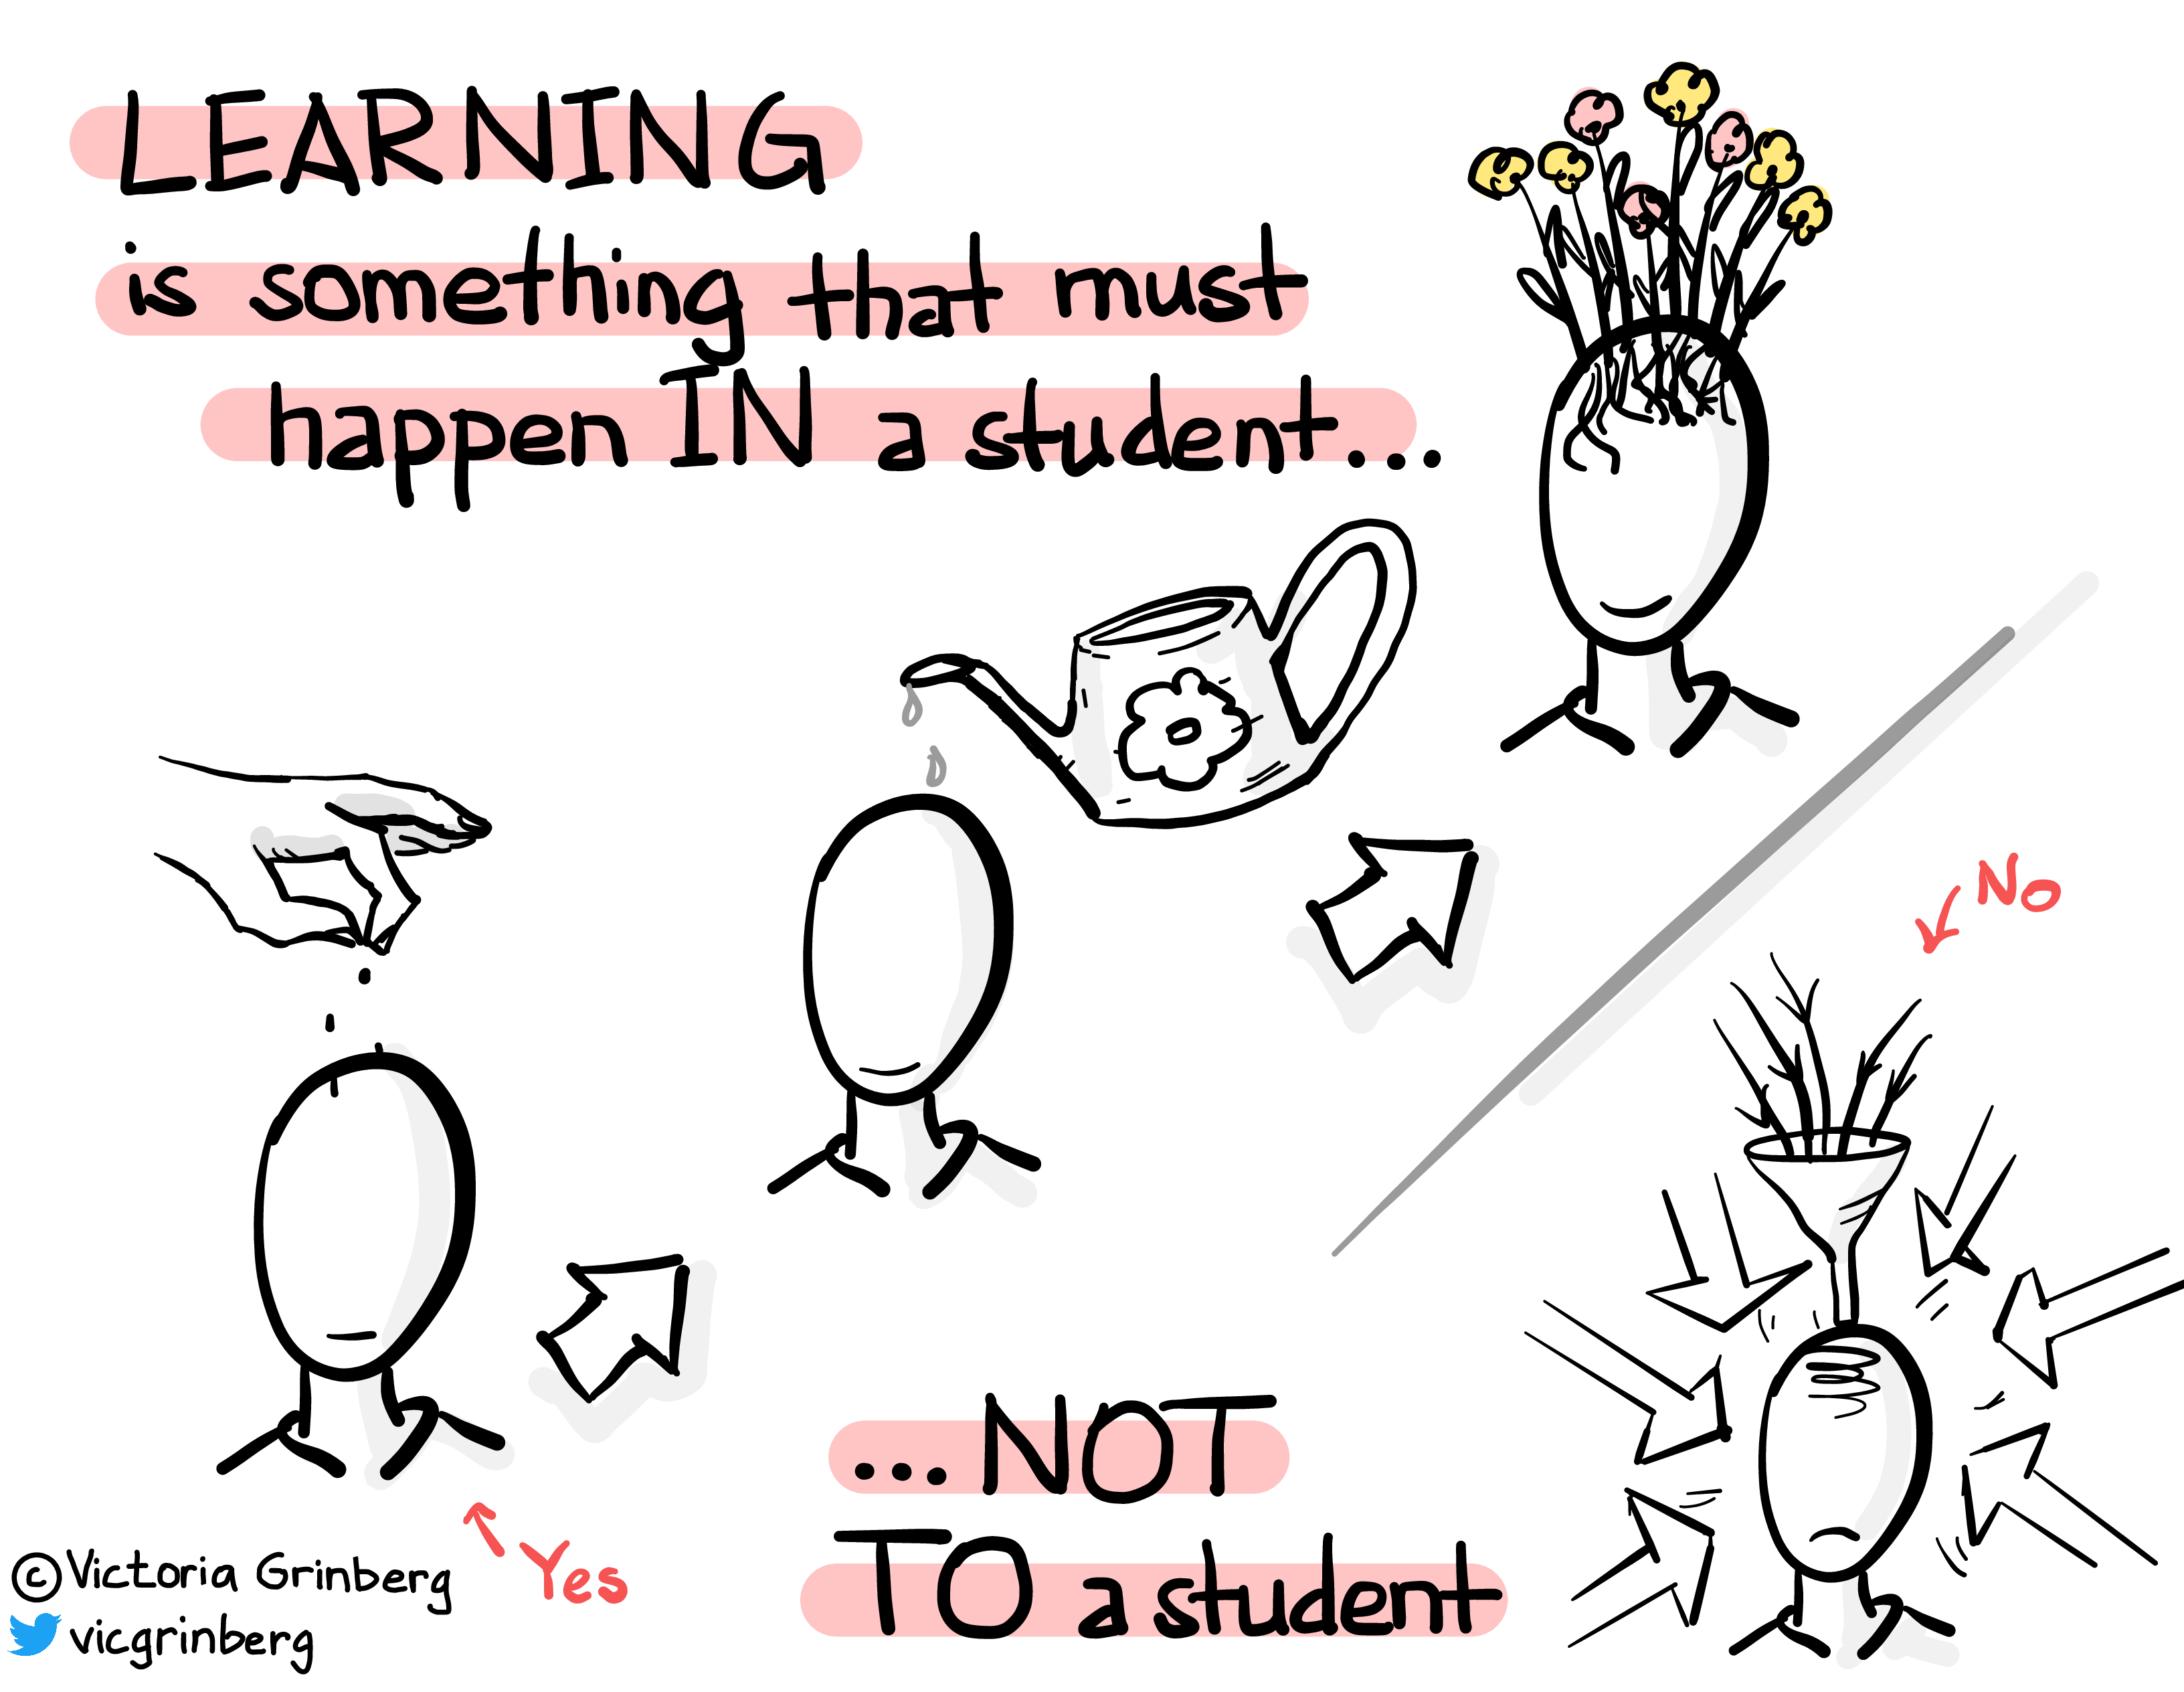 Text: 'Learning is something that must happen in a student, not to a student'. Two illustrations, one positive for the first part of the sentence, showing seeds being planted in a head, seeds being watered on a head and a head with beautiful flowers growing from it - this is how learning should happen. Second negative, showing a funnel going into a head with a lot of arrows besieging the same person - this is how learning should not happen.